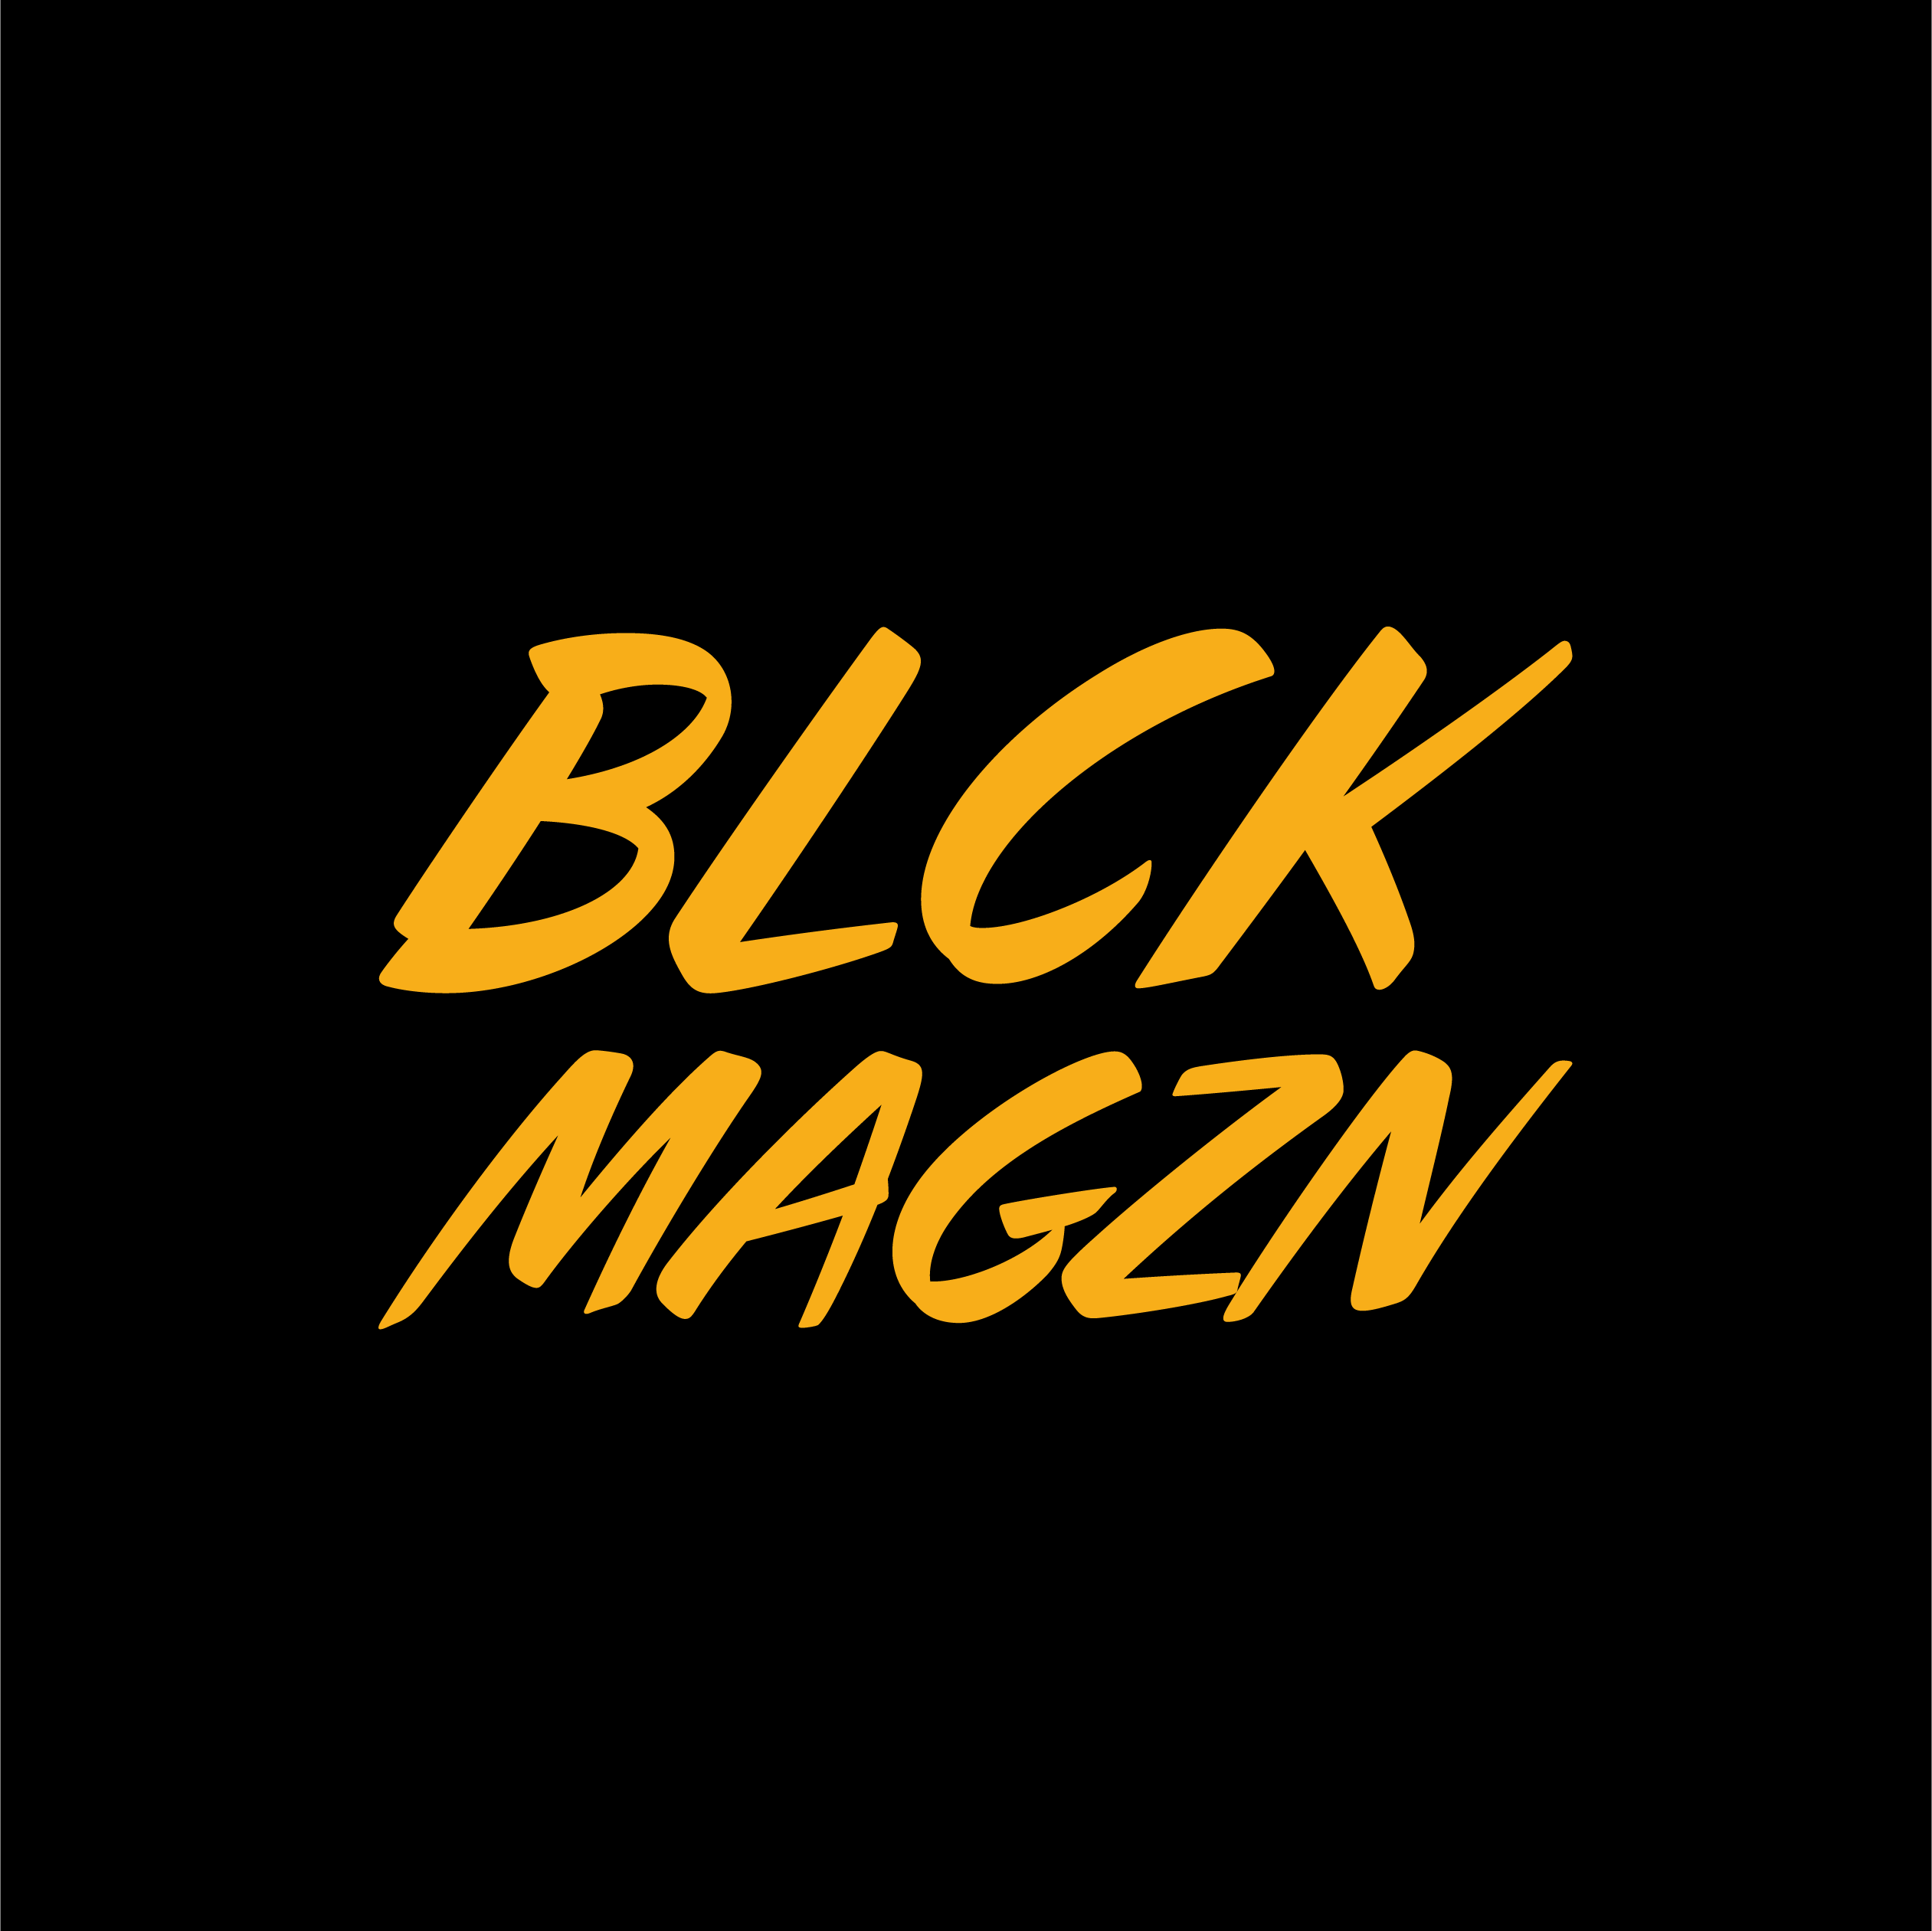 BLCK MAGZN Productions profile on Qualified.One